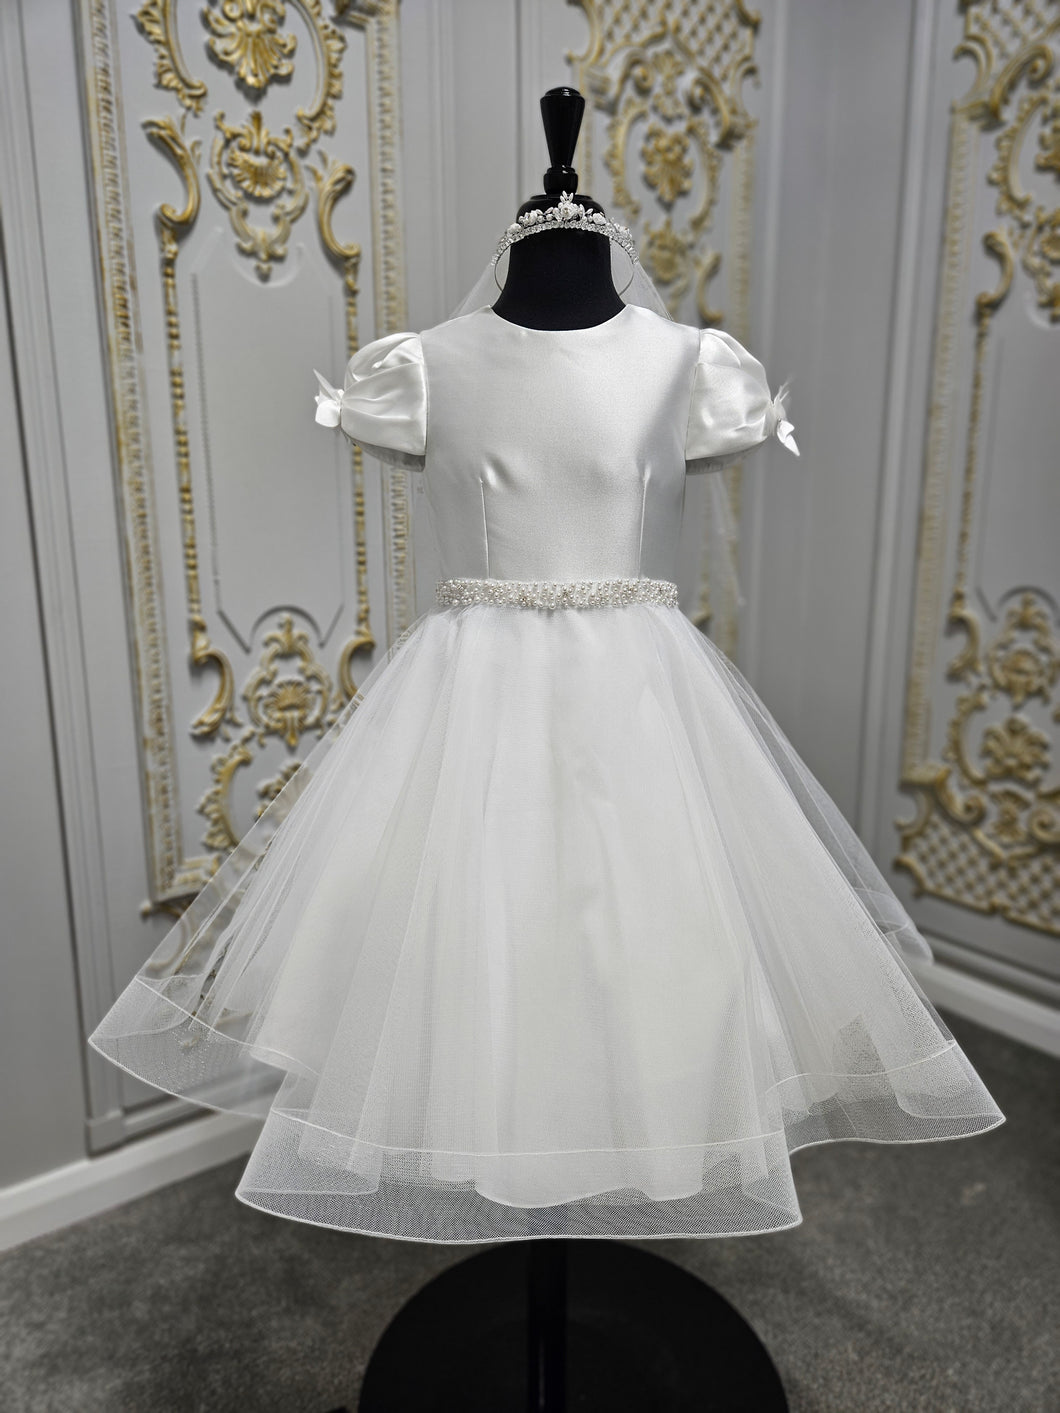 Isabella Girls White Communion Dress IS24610 EXCLUSIVE TO KINDLE